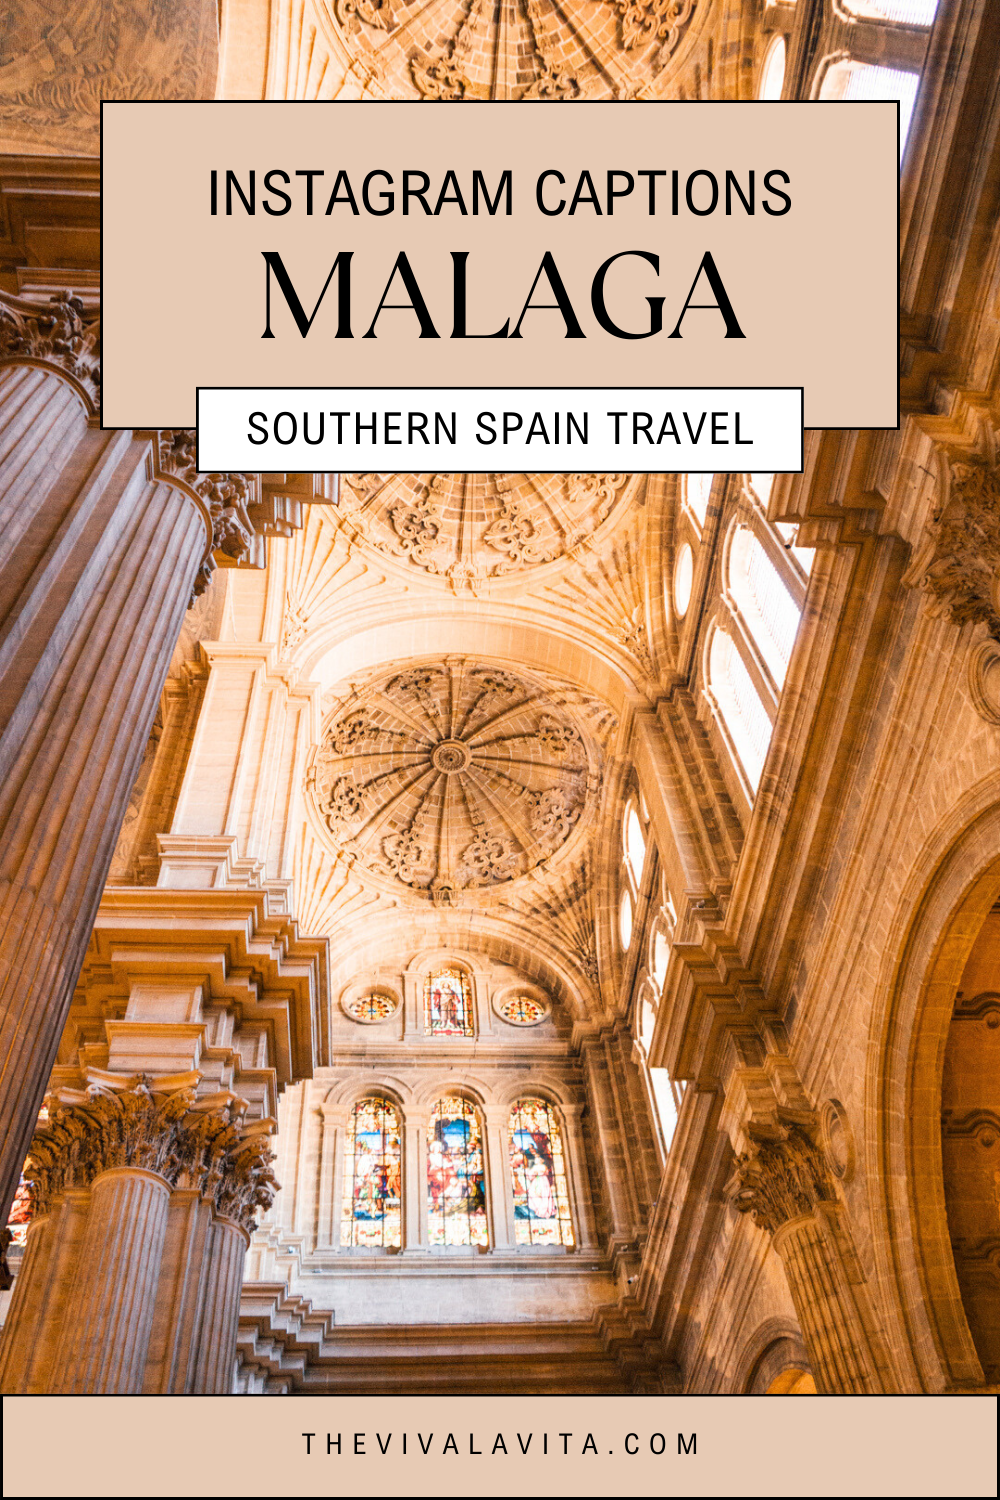 pinterest image showing the inside of Malaga Cathedral in Southern Spain, with a headline: Instagram captions Malaga